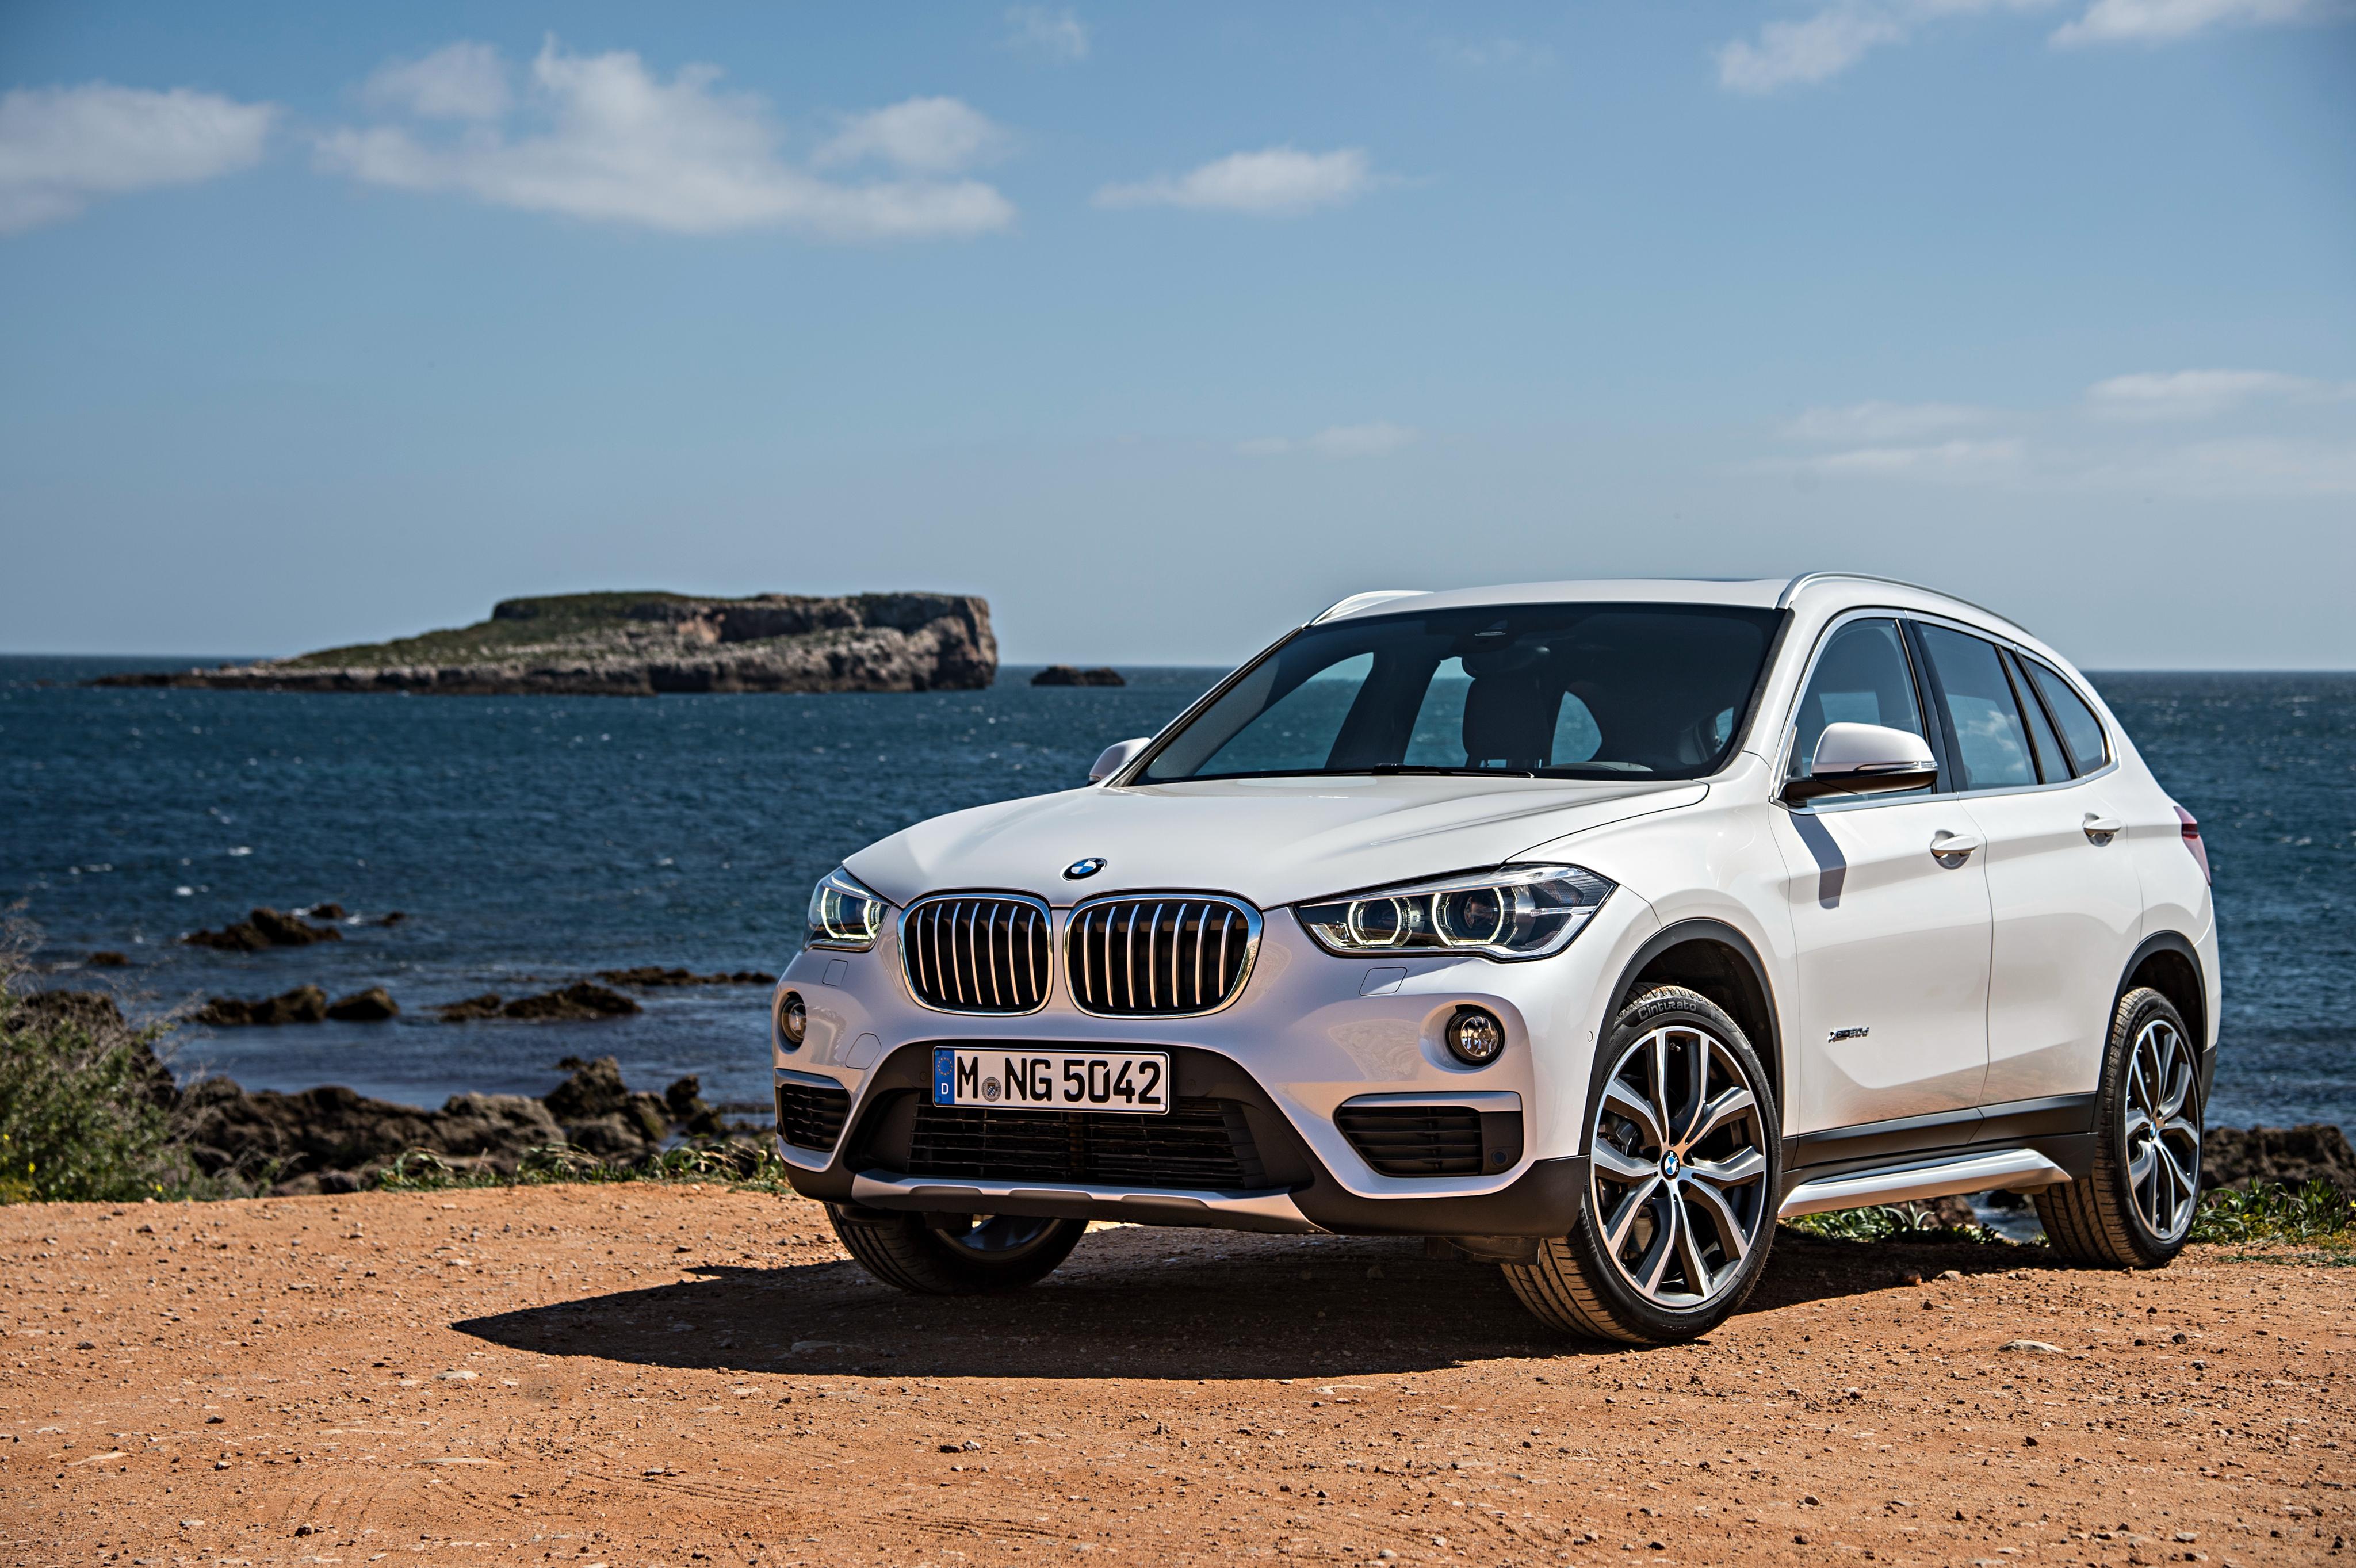 BMW X1 on the Beach 4k Ultra HD Wallpaper. Background Image